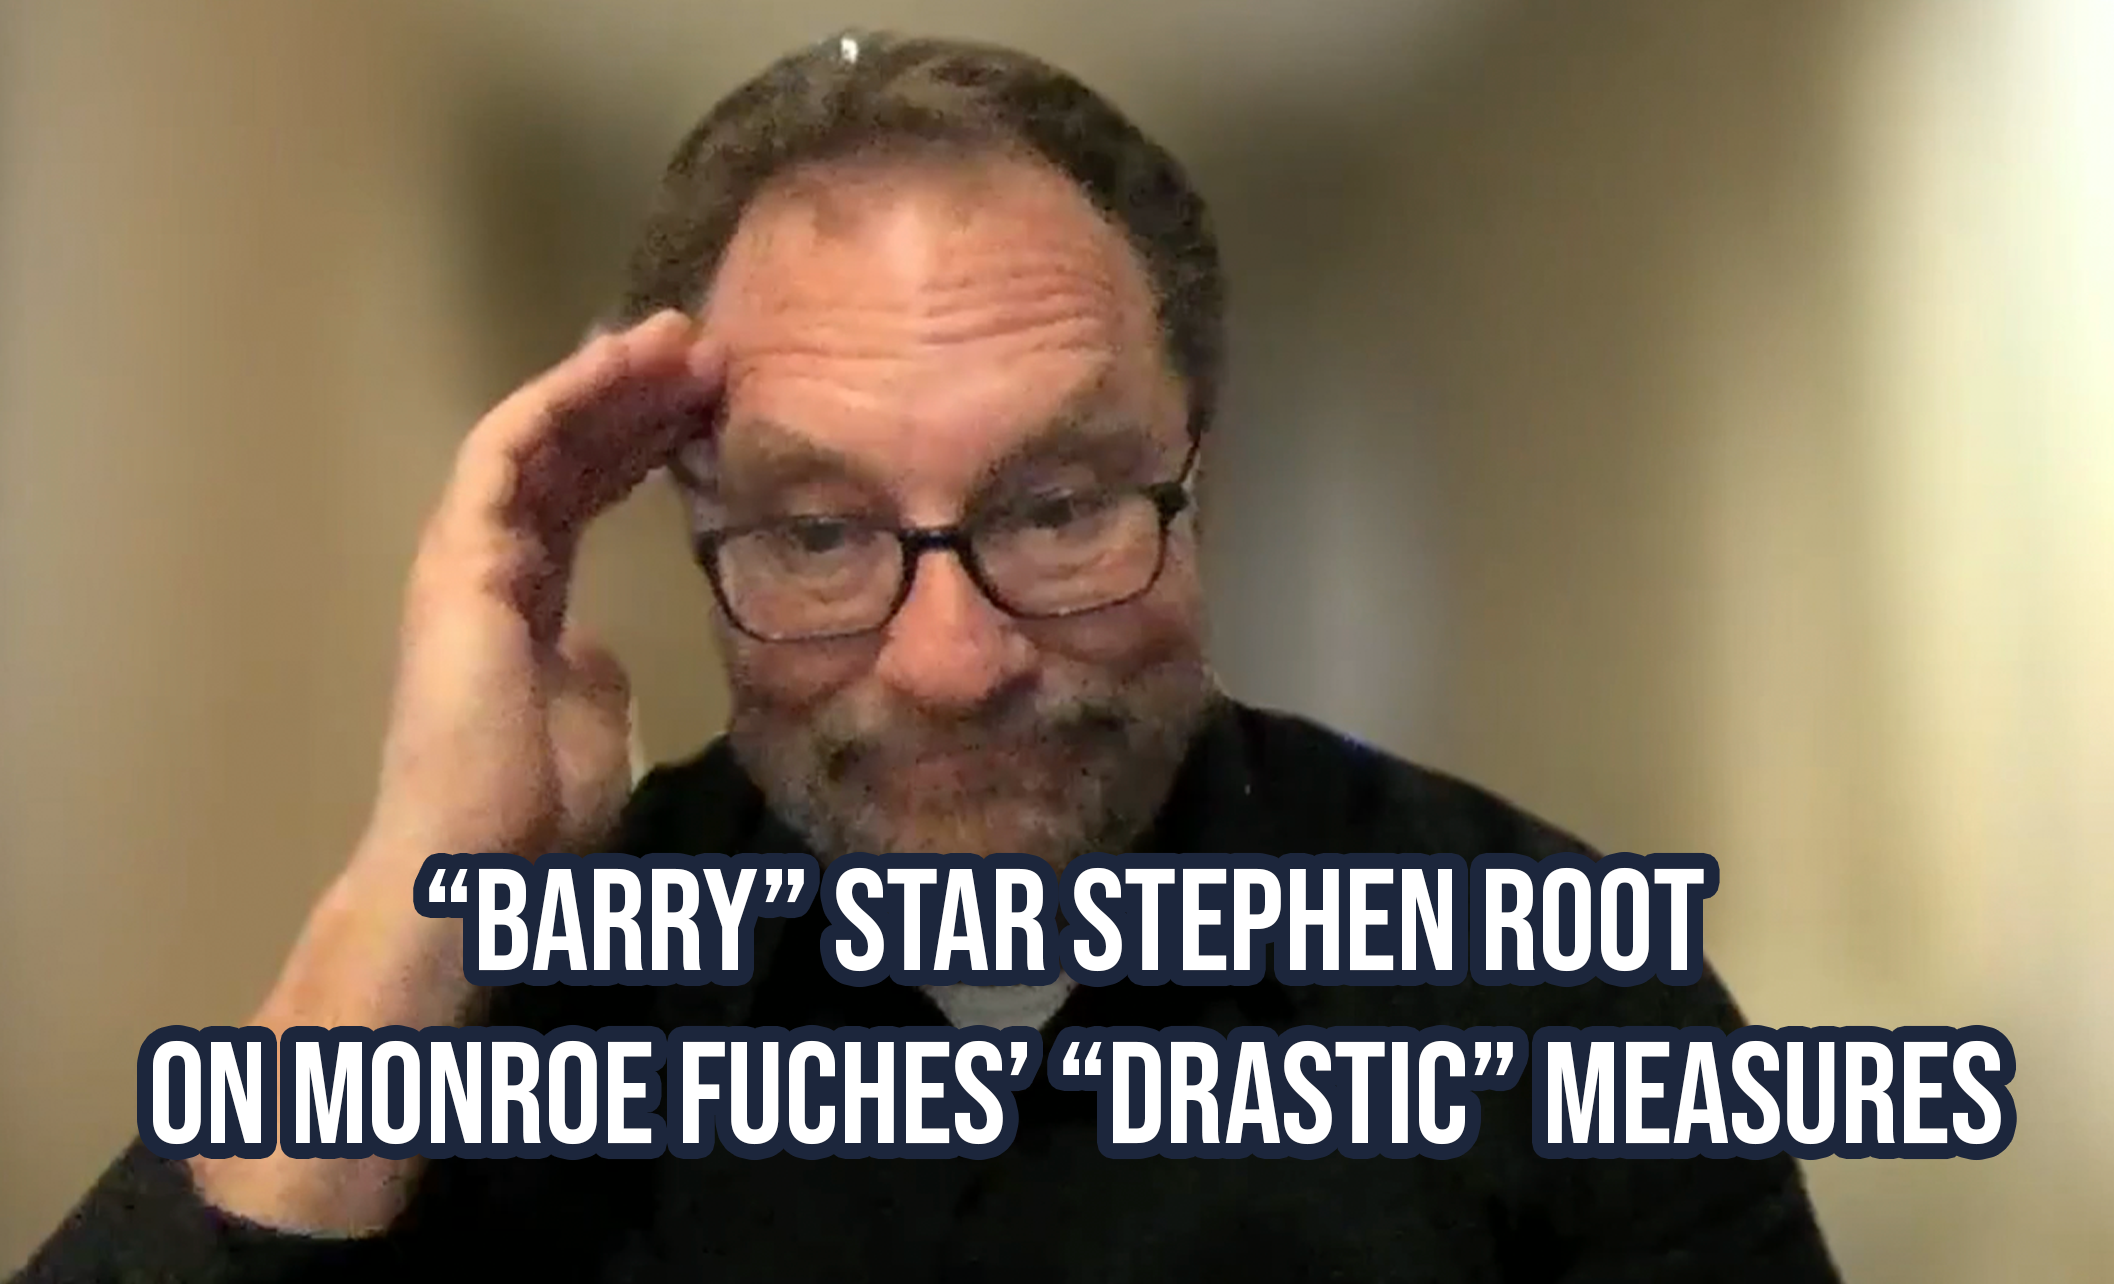 Barry star Stephen Root on Monroe Fuches’ “drastic” measures